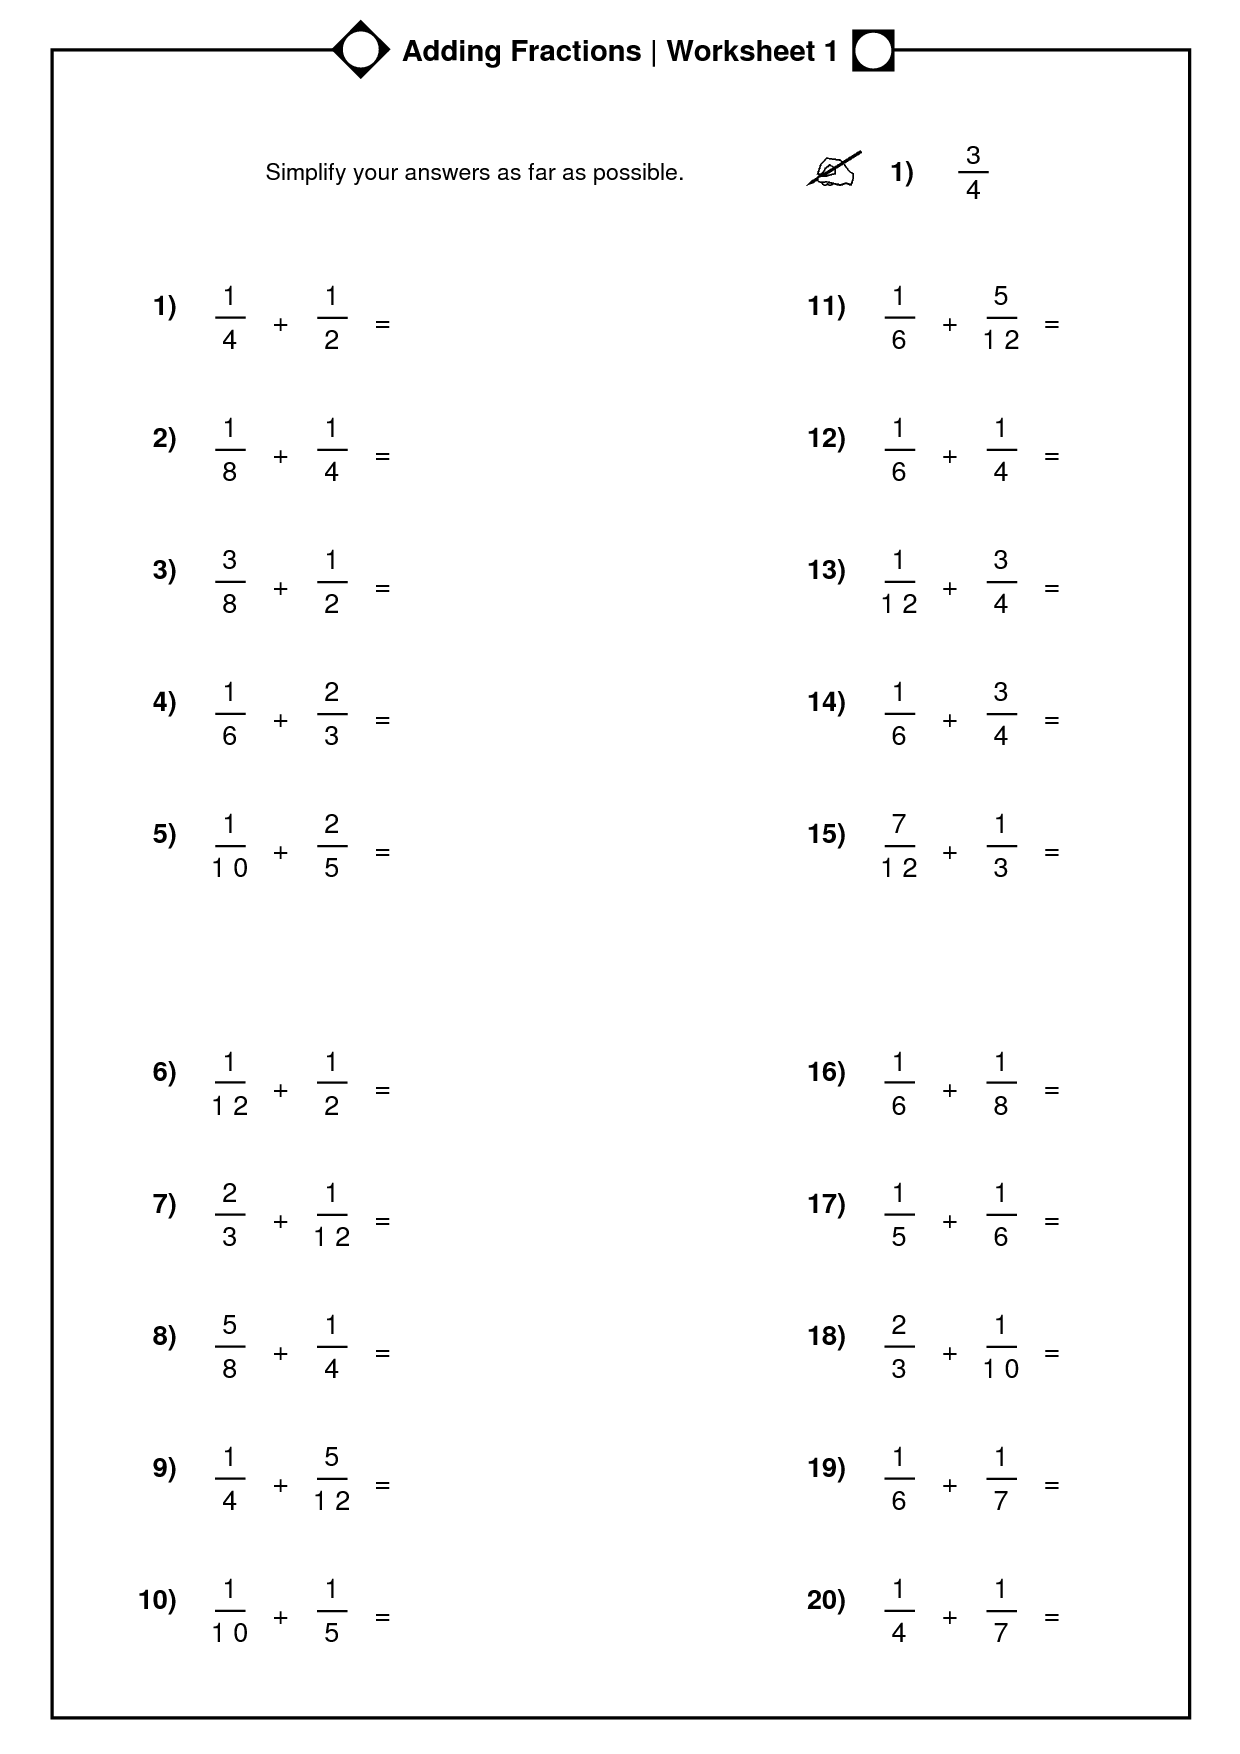 Adding Fractions and Mixed Numbers Worksheets